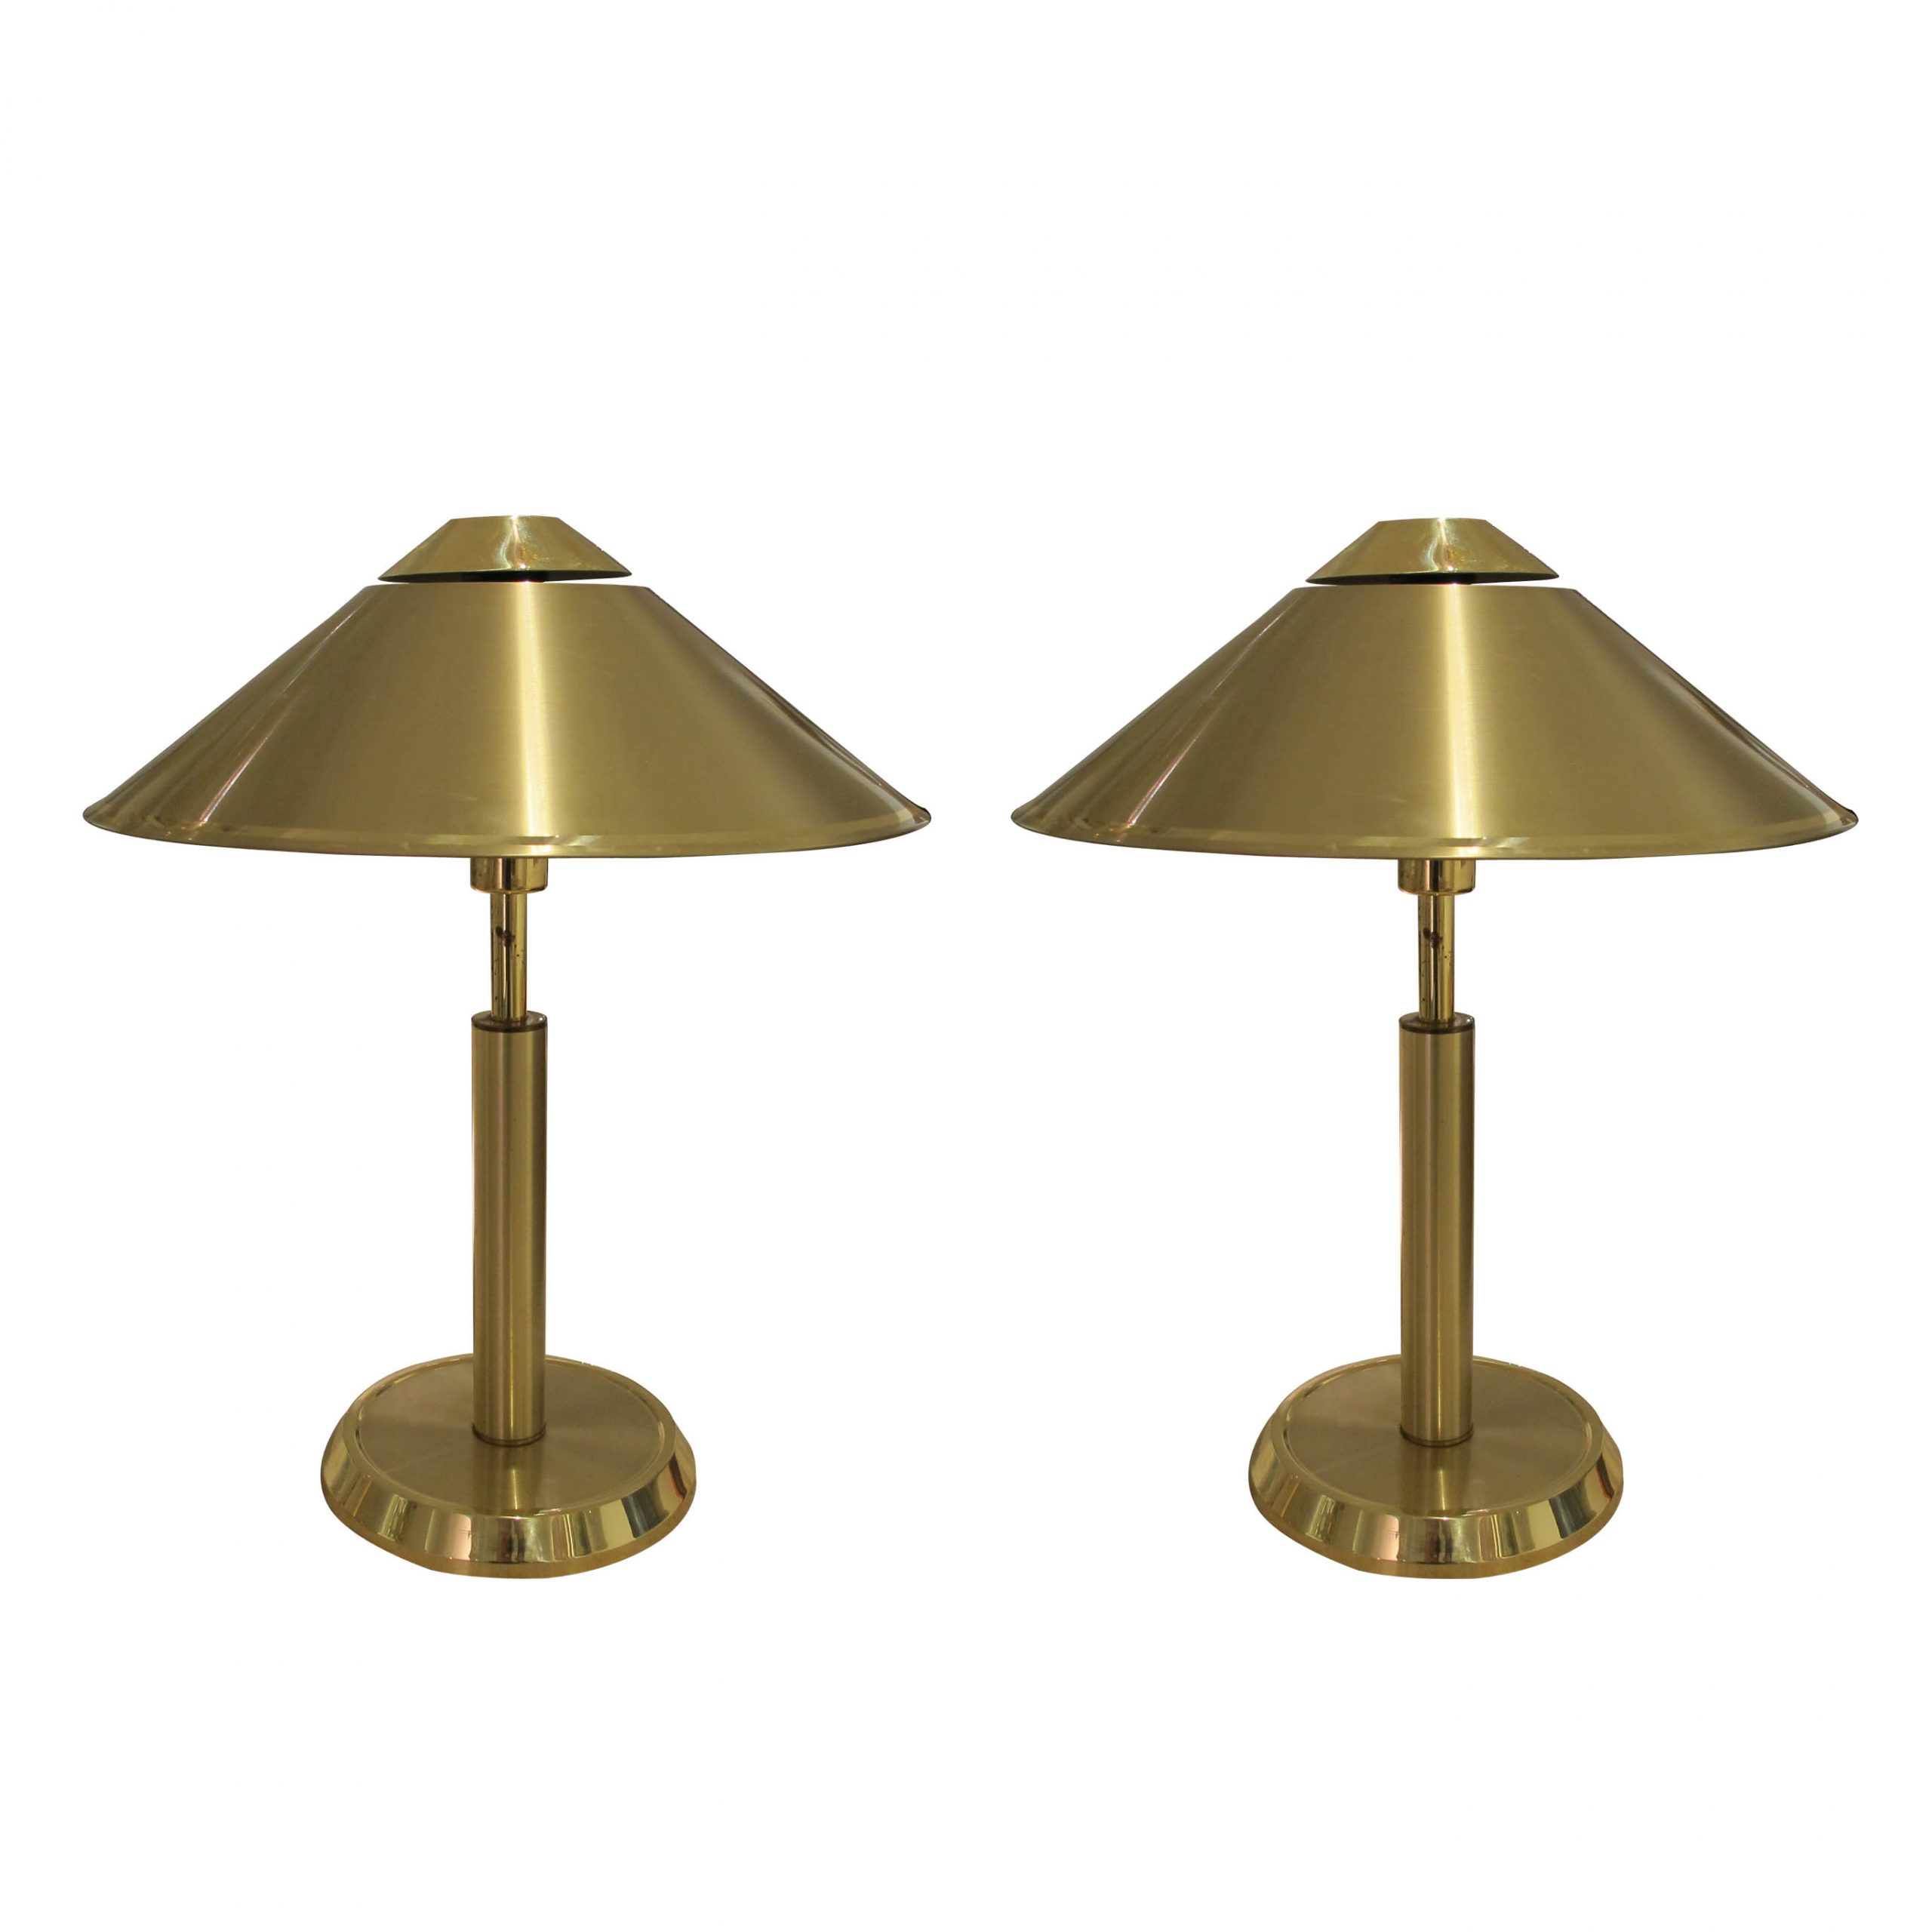 1970s Swedish Large Pair Of Brass Table Lamps With Cone Shaped